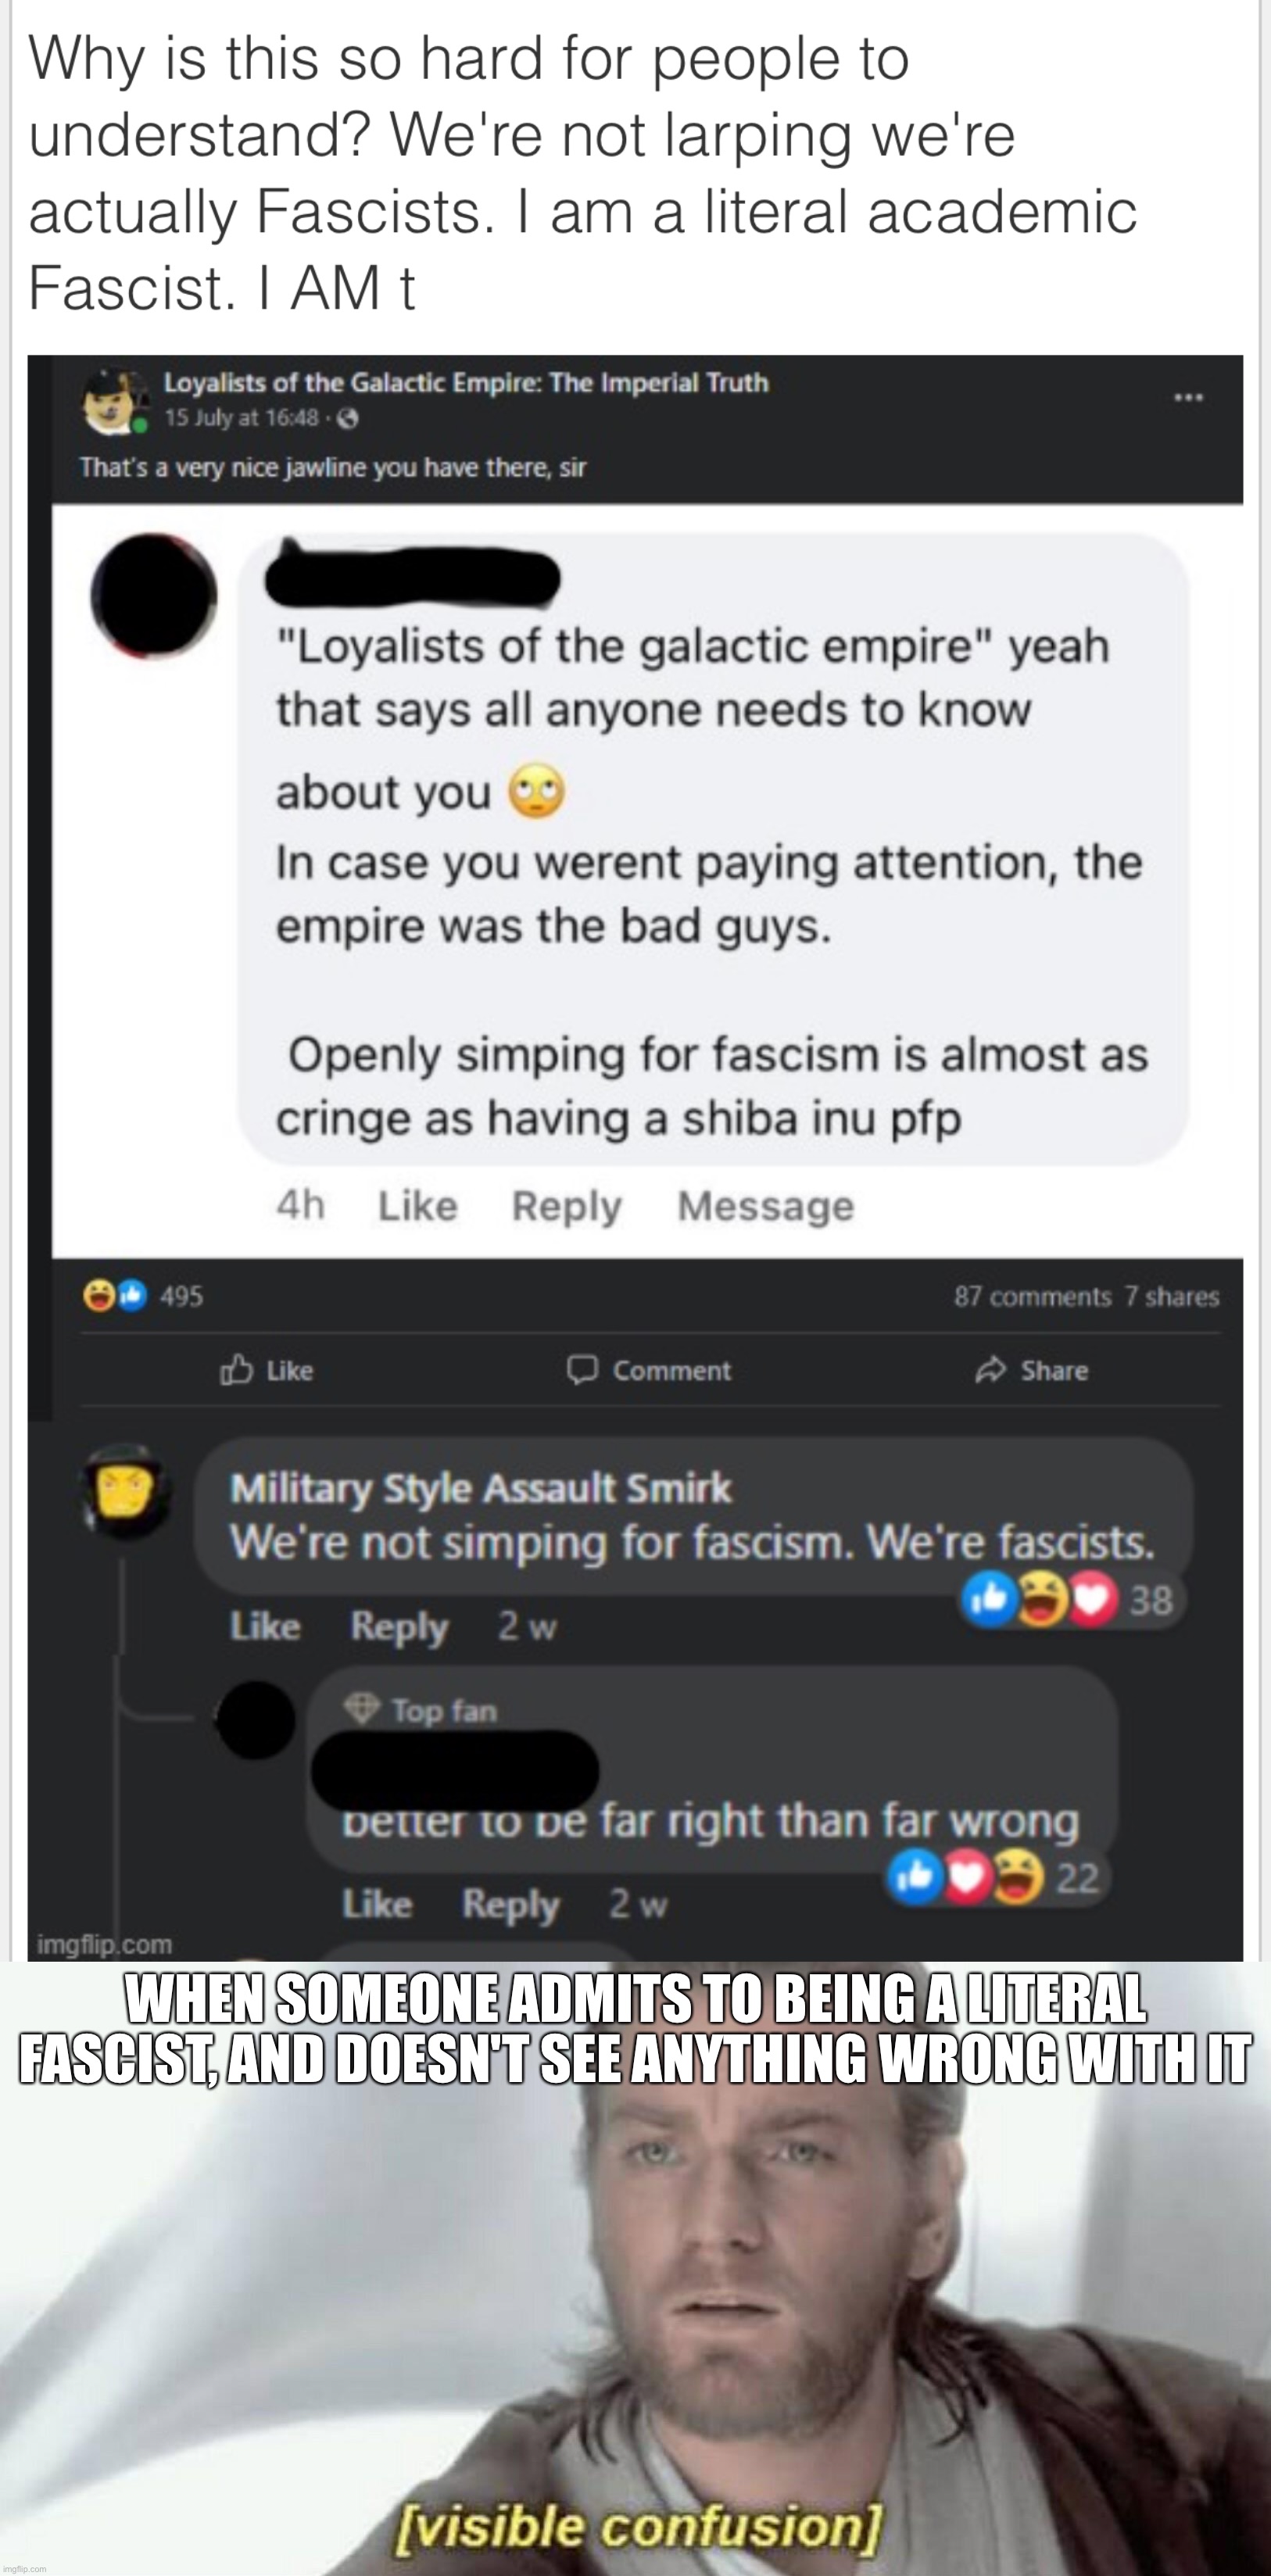 WHEN SOMEONE ADMITS TO BEING A LITERAL FASCIST, AND DOESN'T SEE ANYTHING WRONG WITH IT | image tagged in visible confusion | made w/ Imgflip meme maker